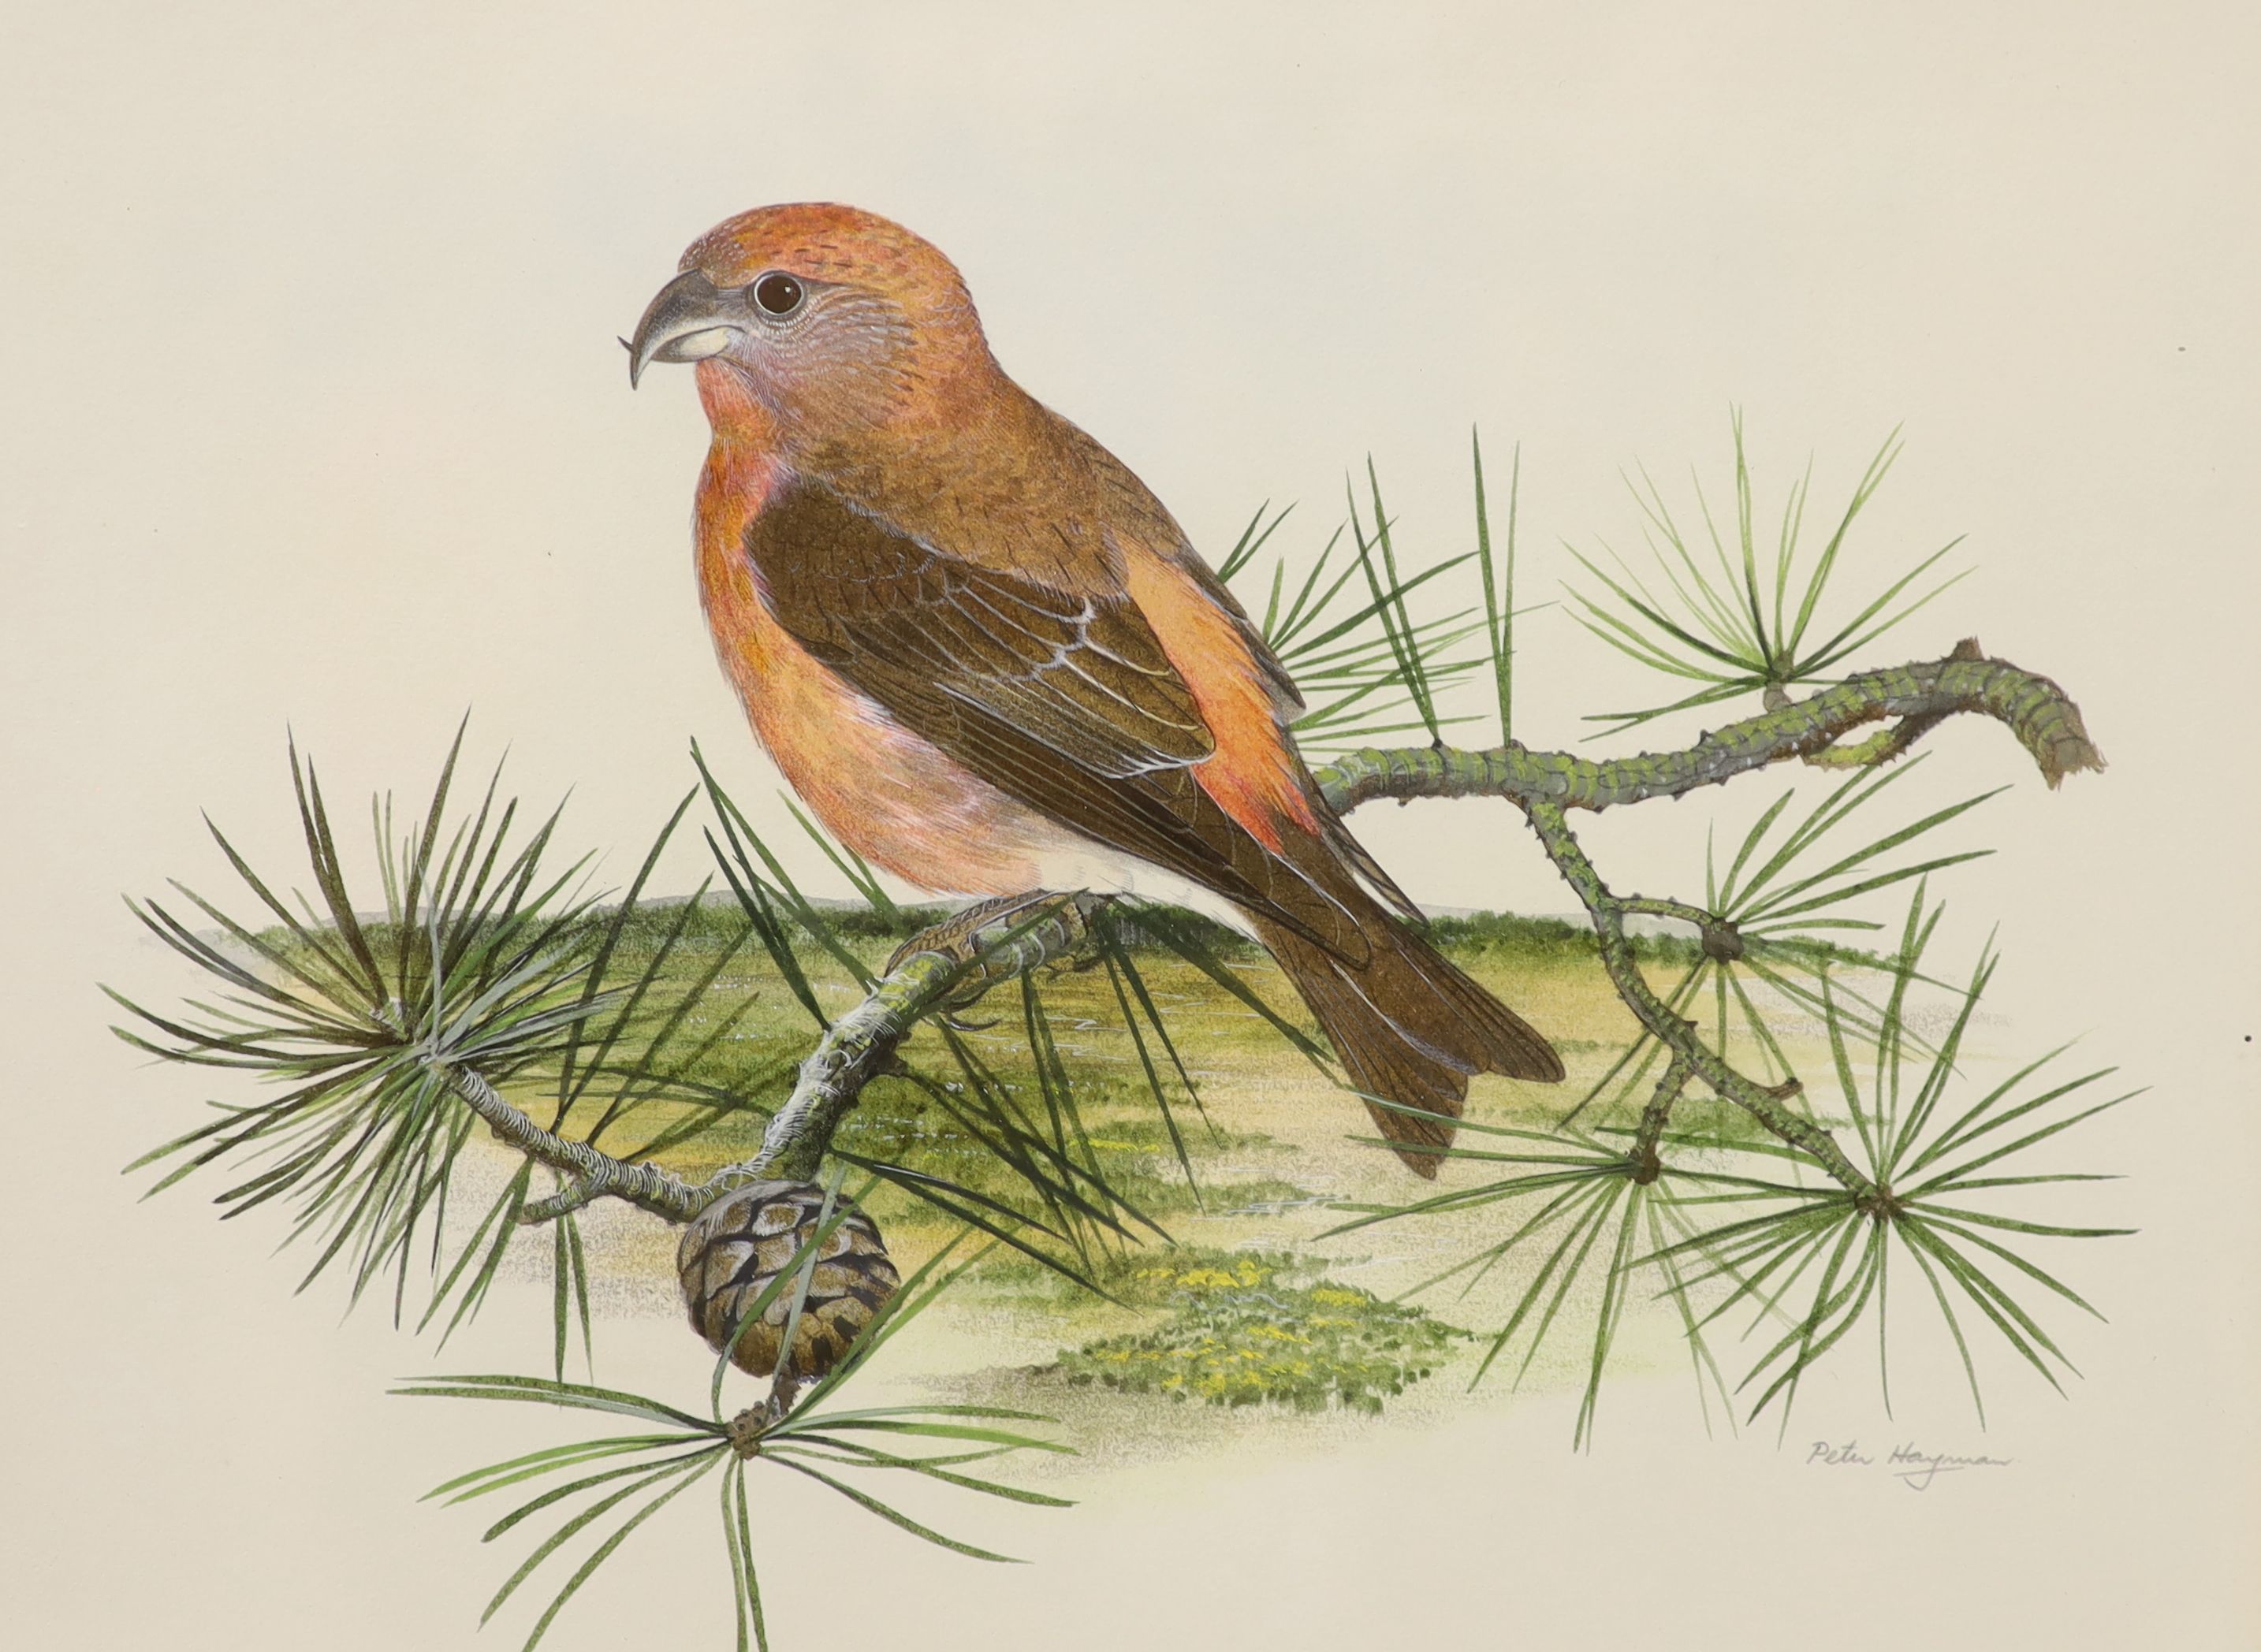 Peter Hayman (1930-), watercolour, Crossbill on a pine branch, signed, 23 x 30cm